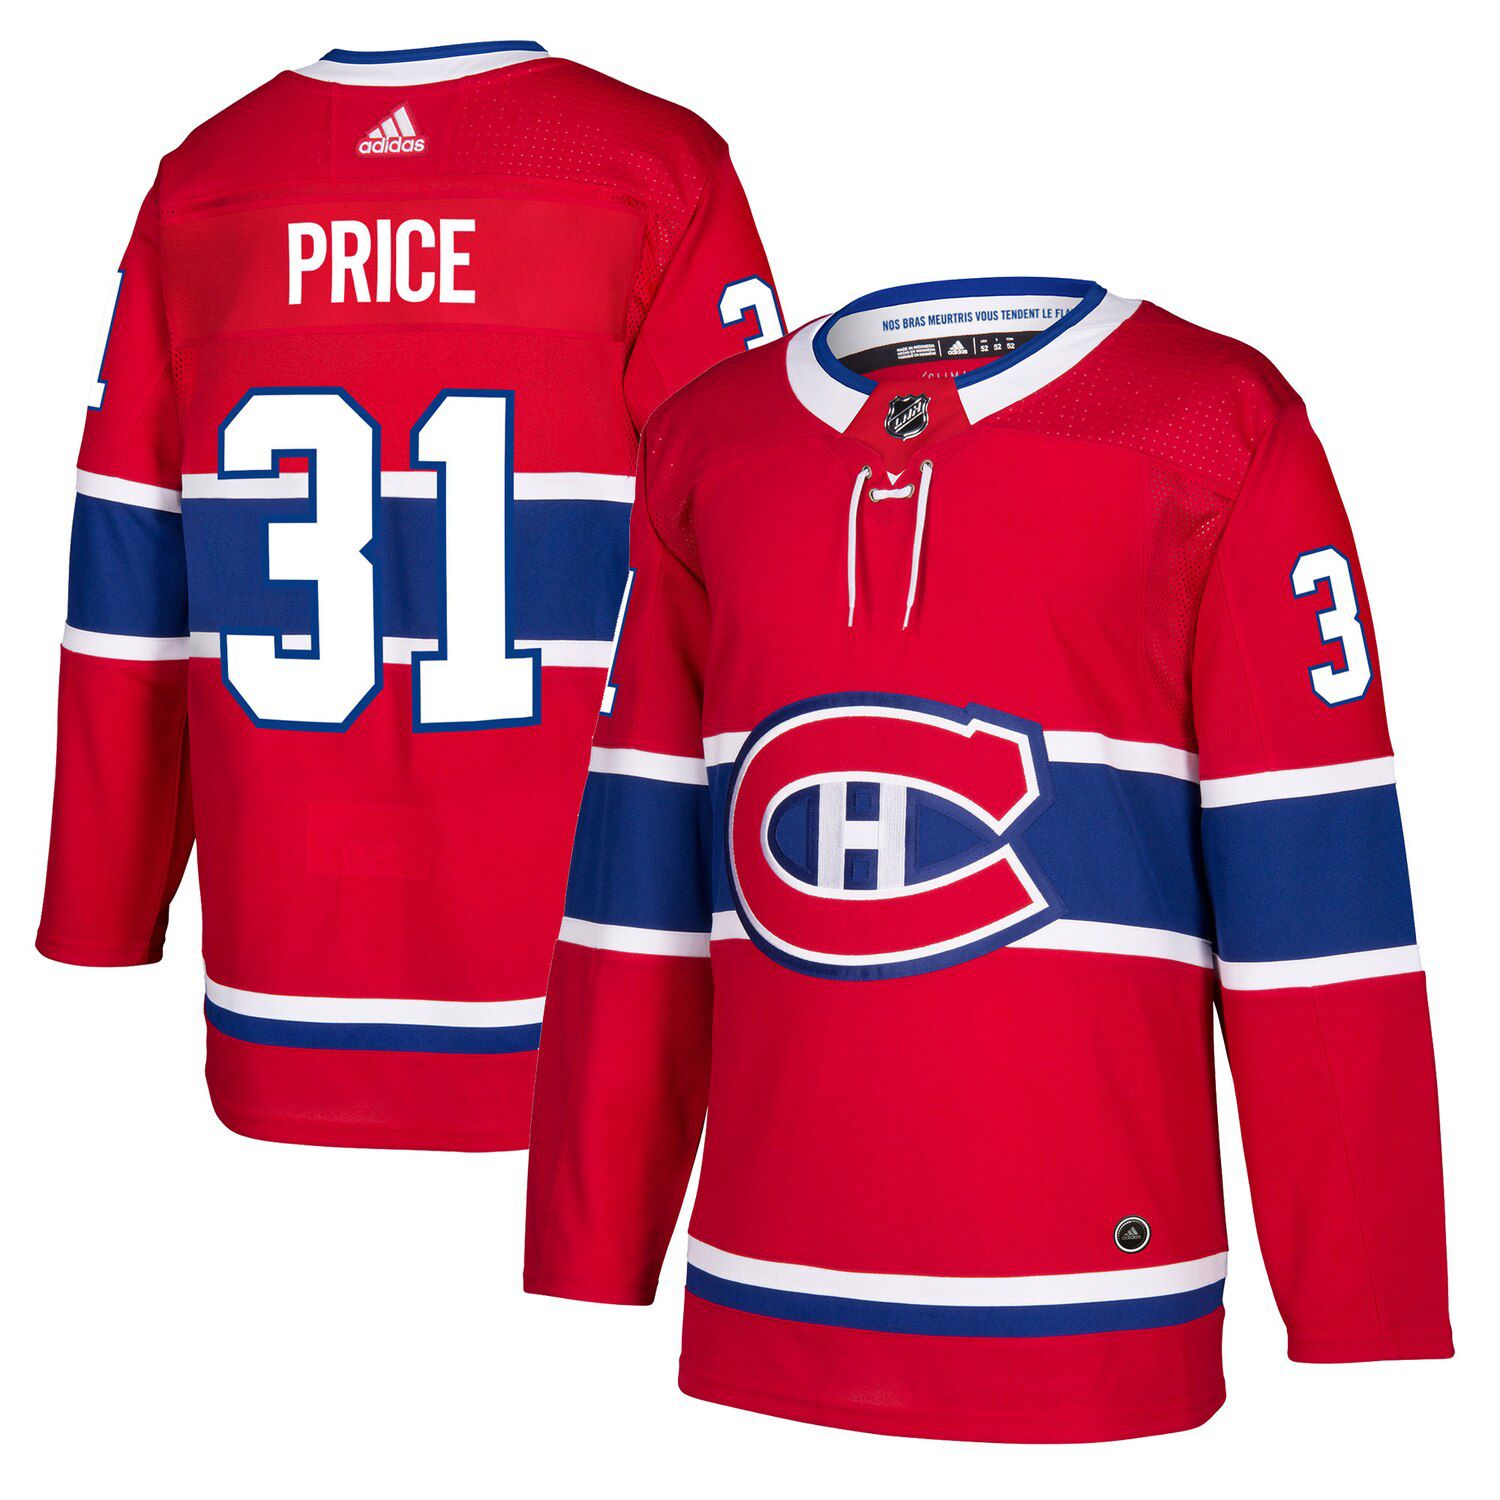 Montreal Canadiens Authentic Player Jersey